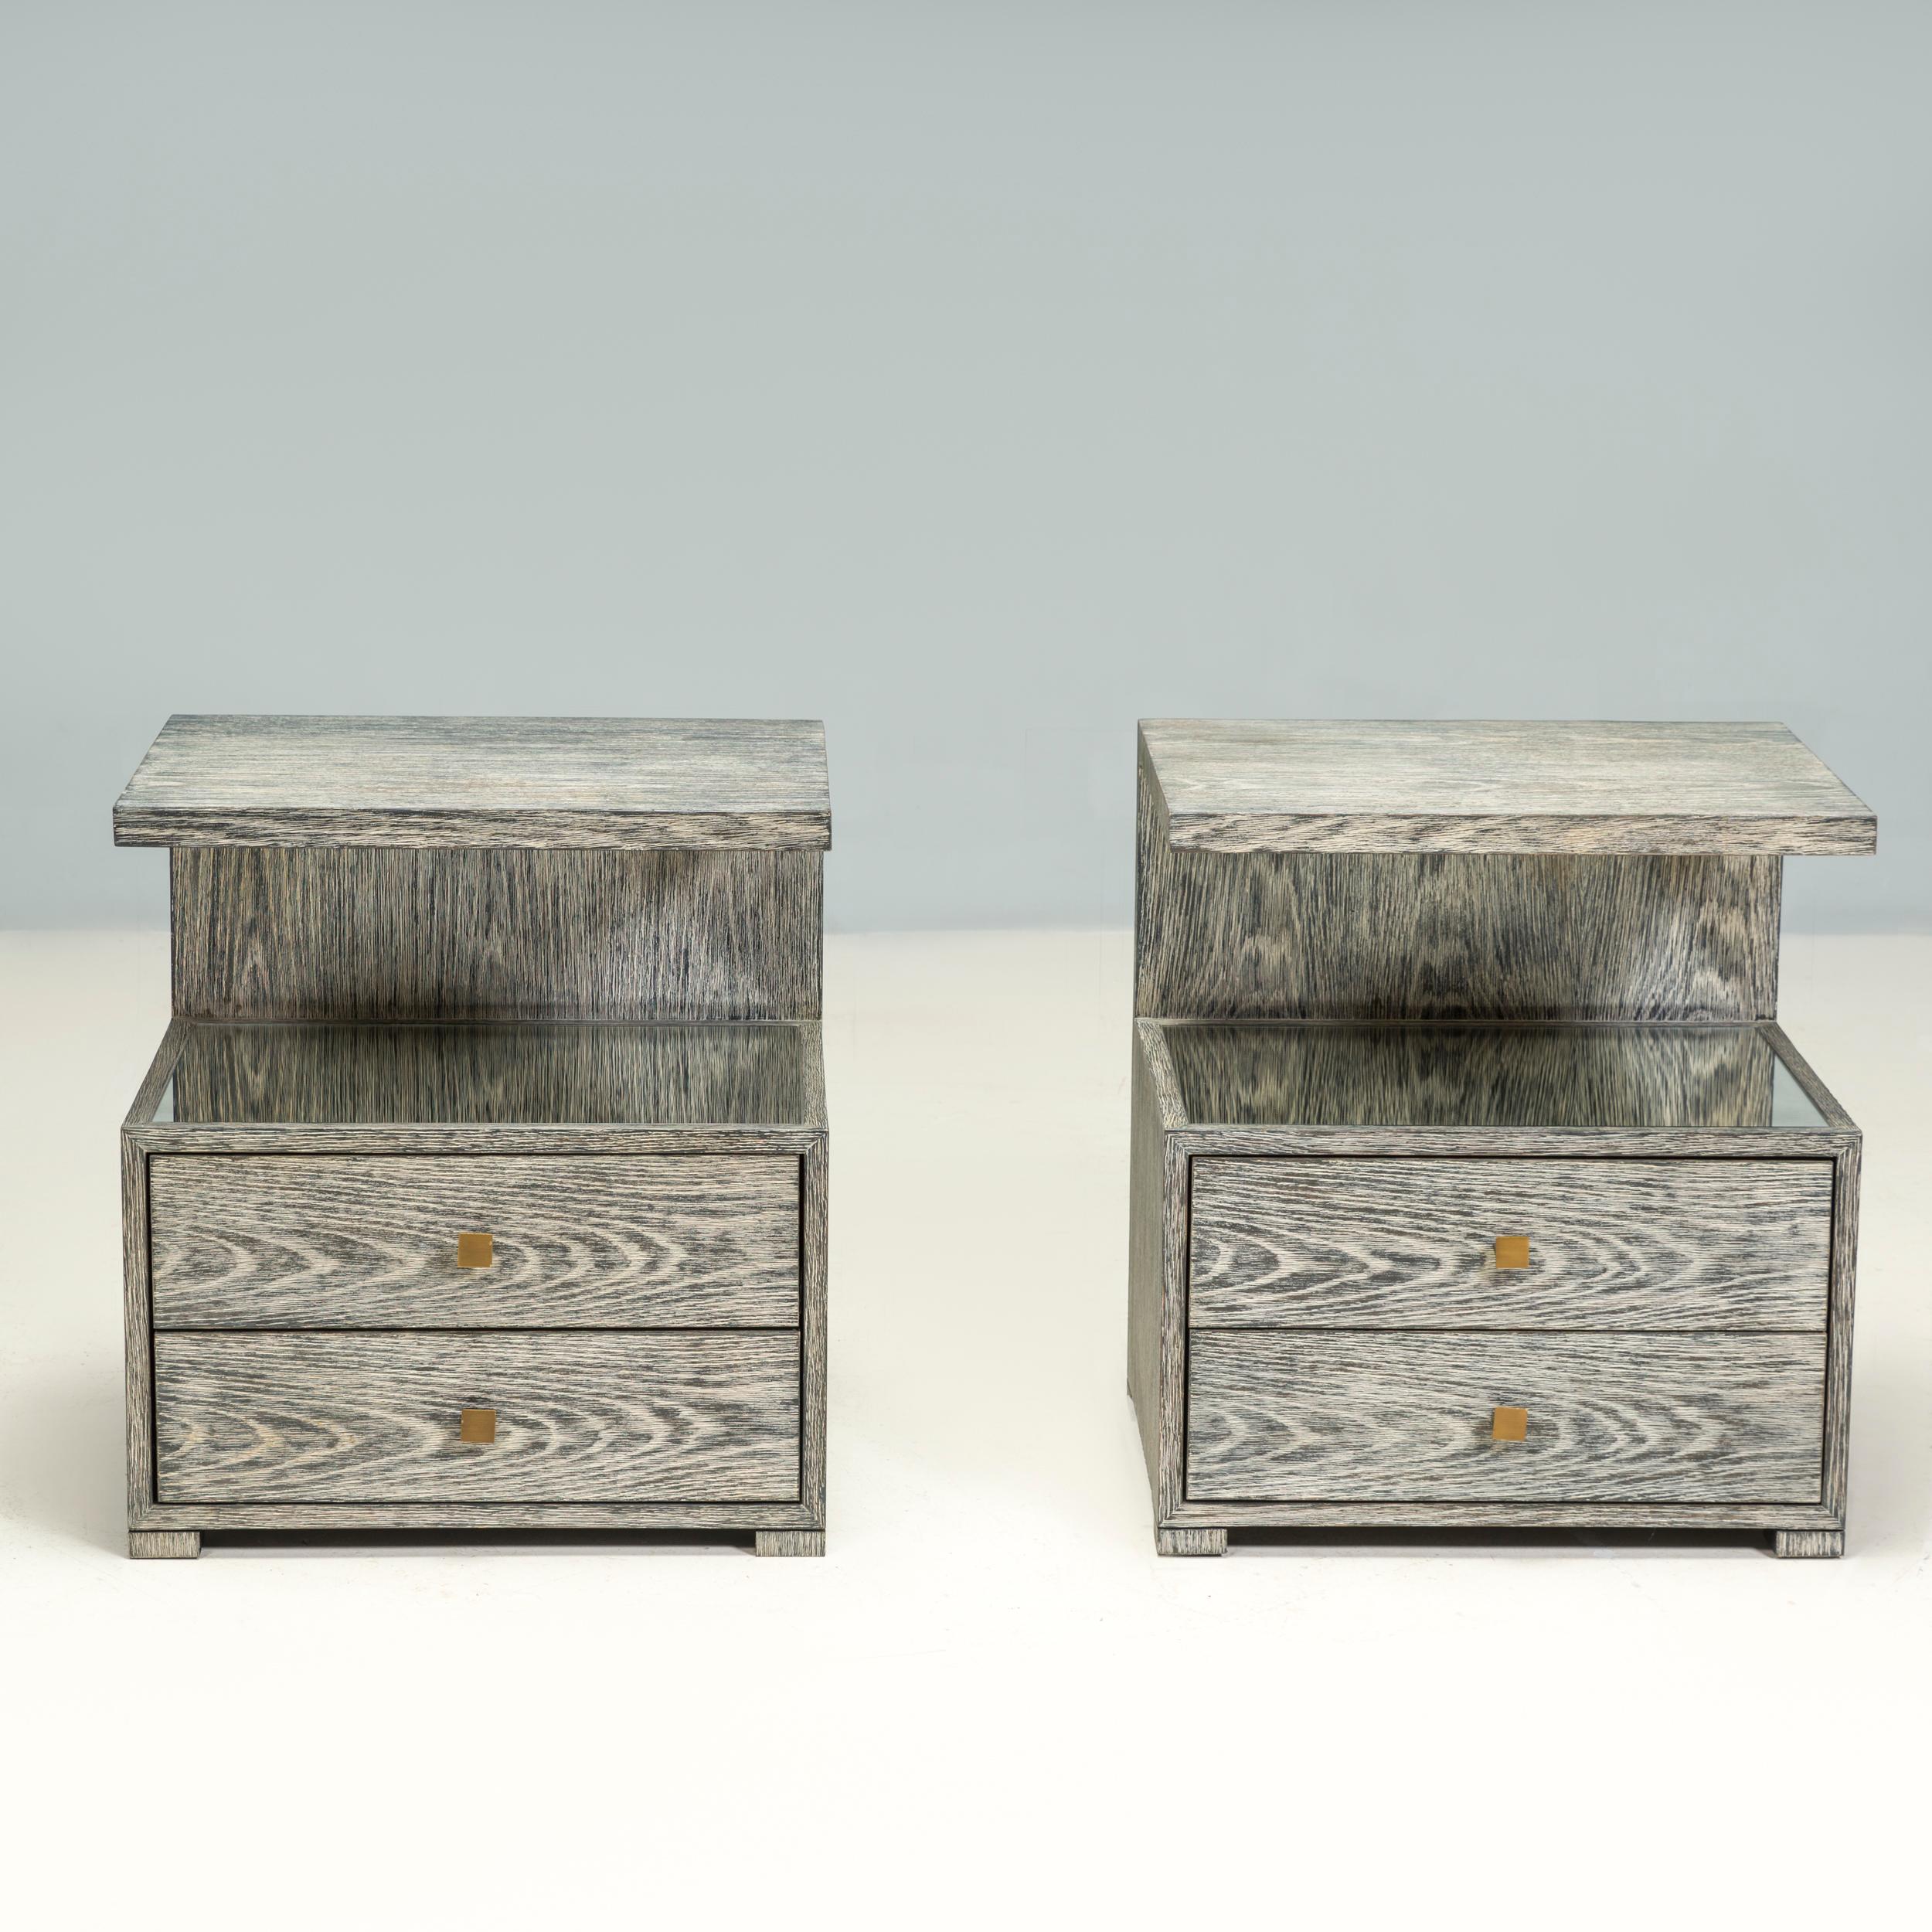 Julian Chichester founded his furniture design company in 1995, inspired by the classic shapes from the 19th and 20th centuries and adding his own unique twist through contemporary finishes and details.

This set of two Enzo bedside tables are